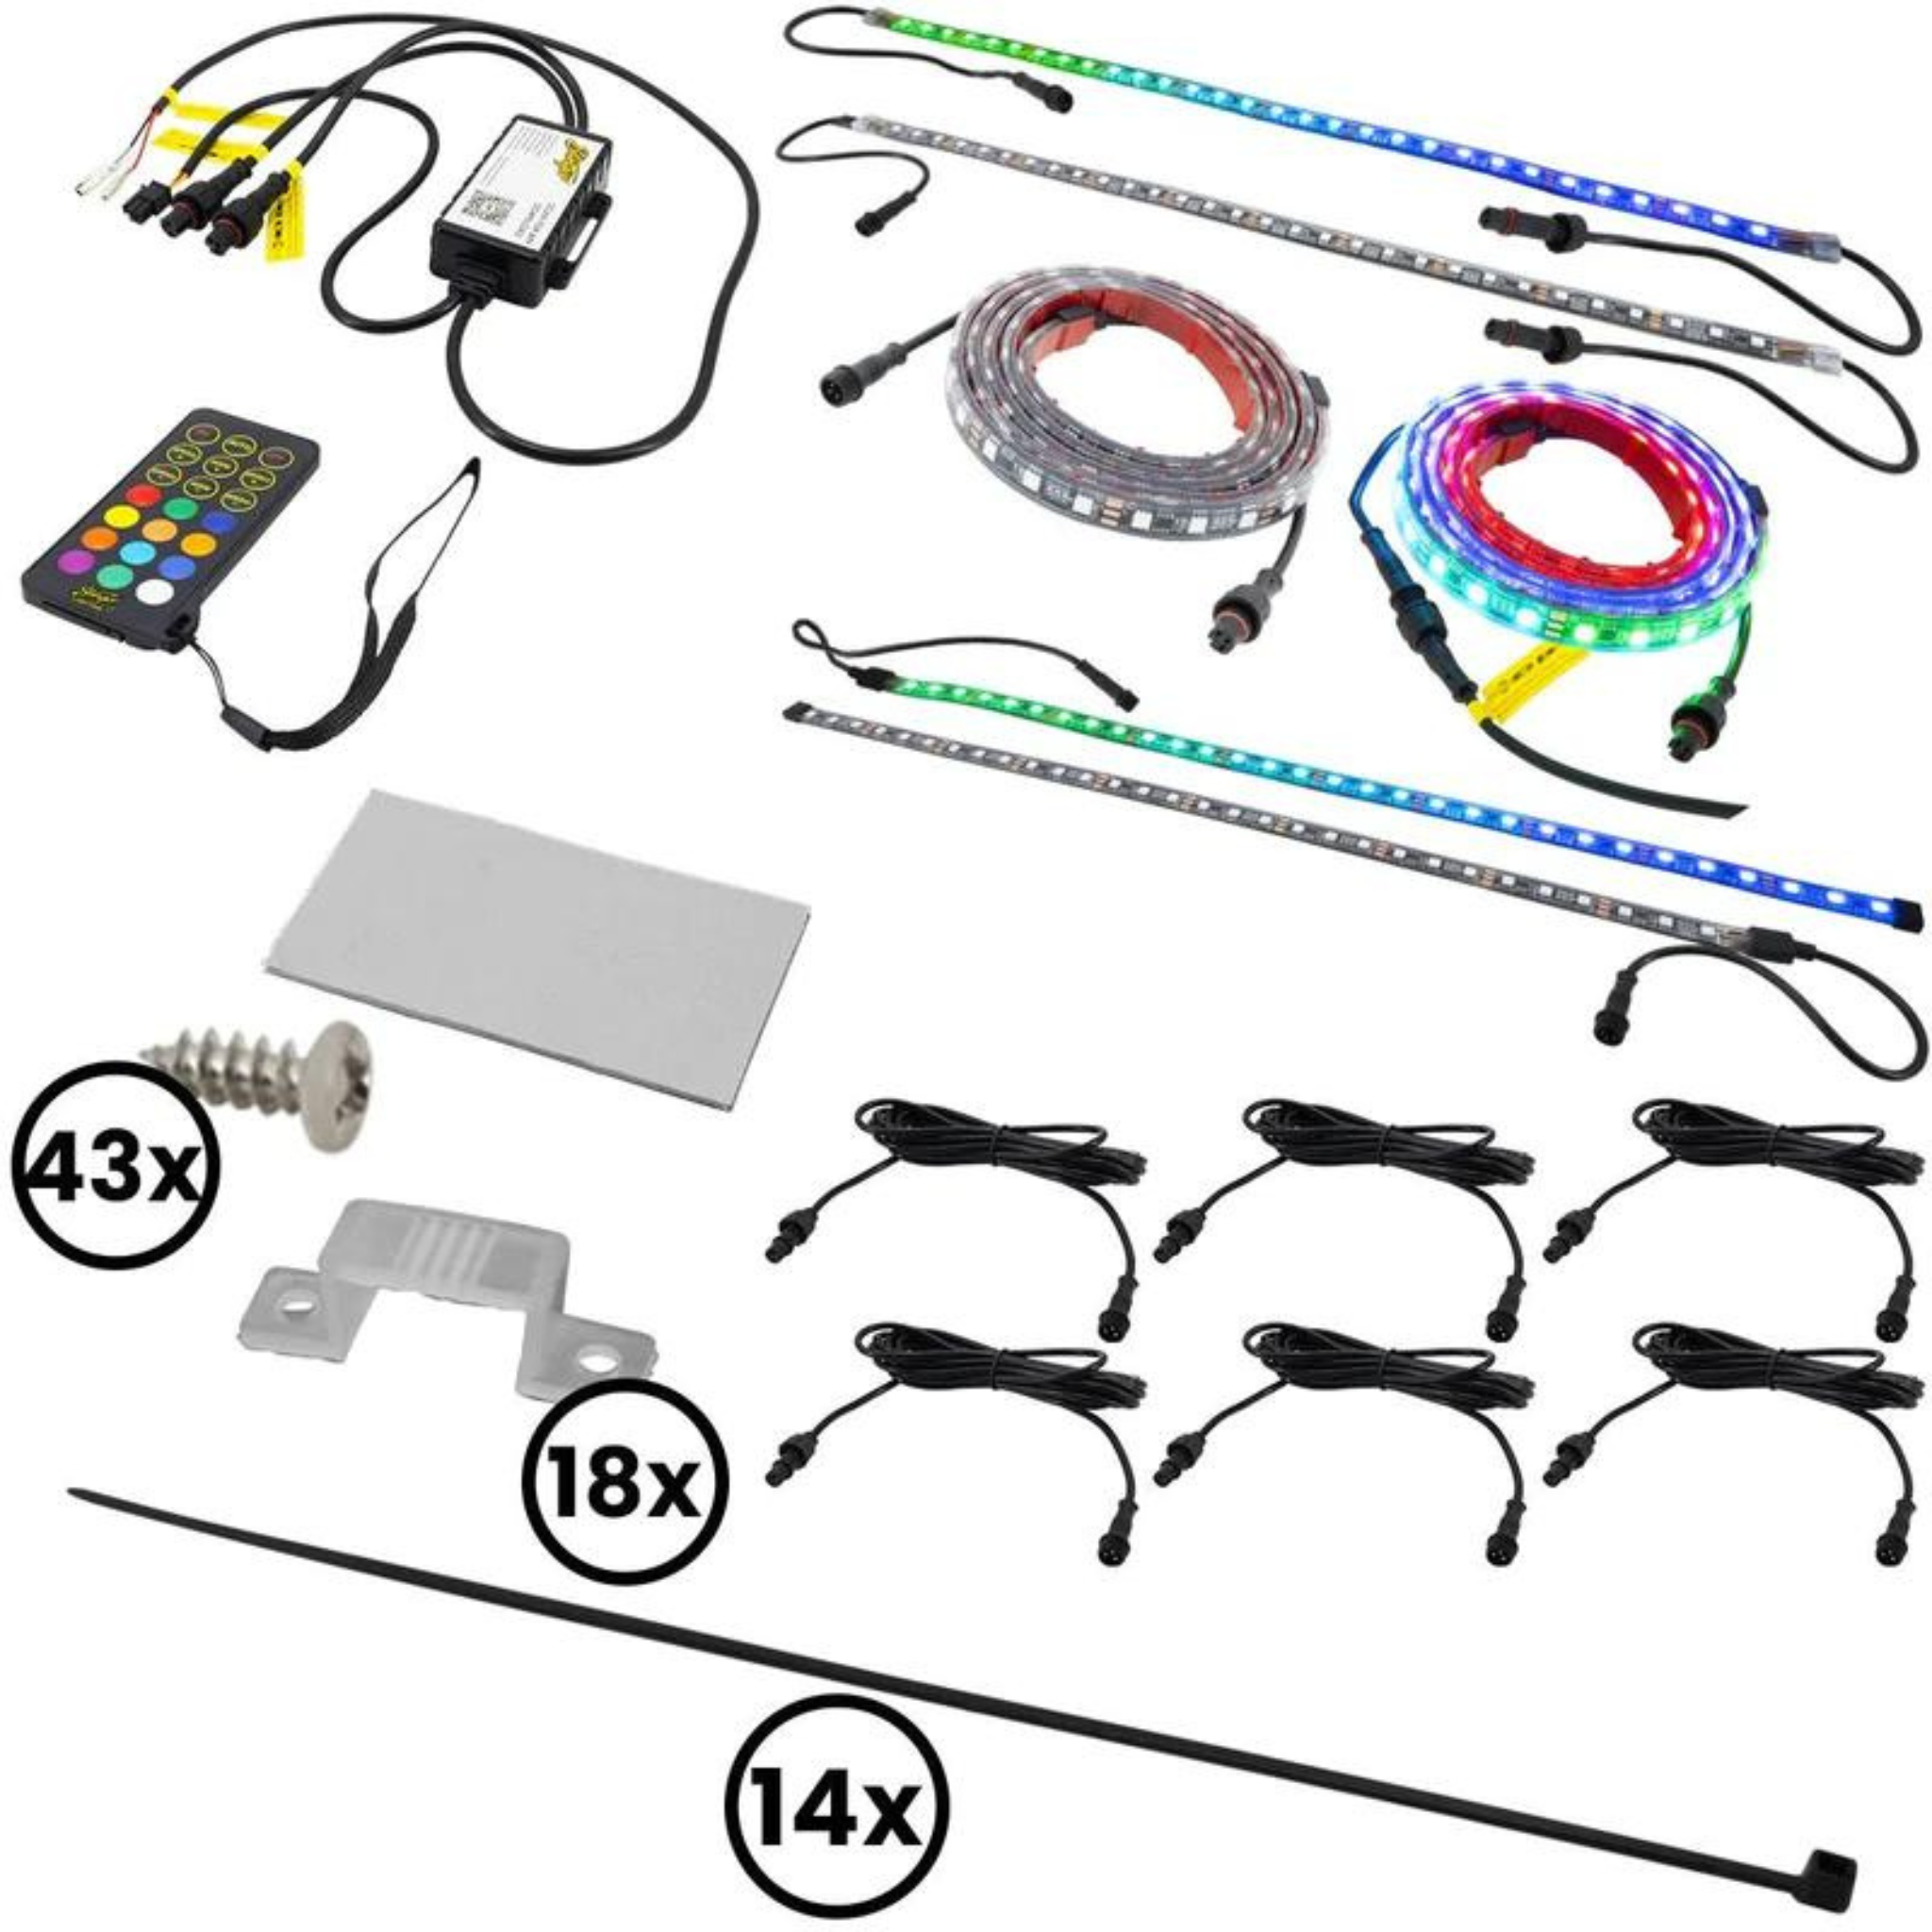 ENLIGHT10 6 Piece Dynamic RGB LED Strip Light Kit with On/Off Adapter and Bluetooth Remote